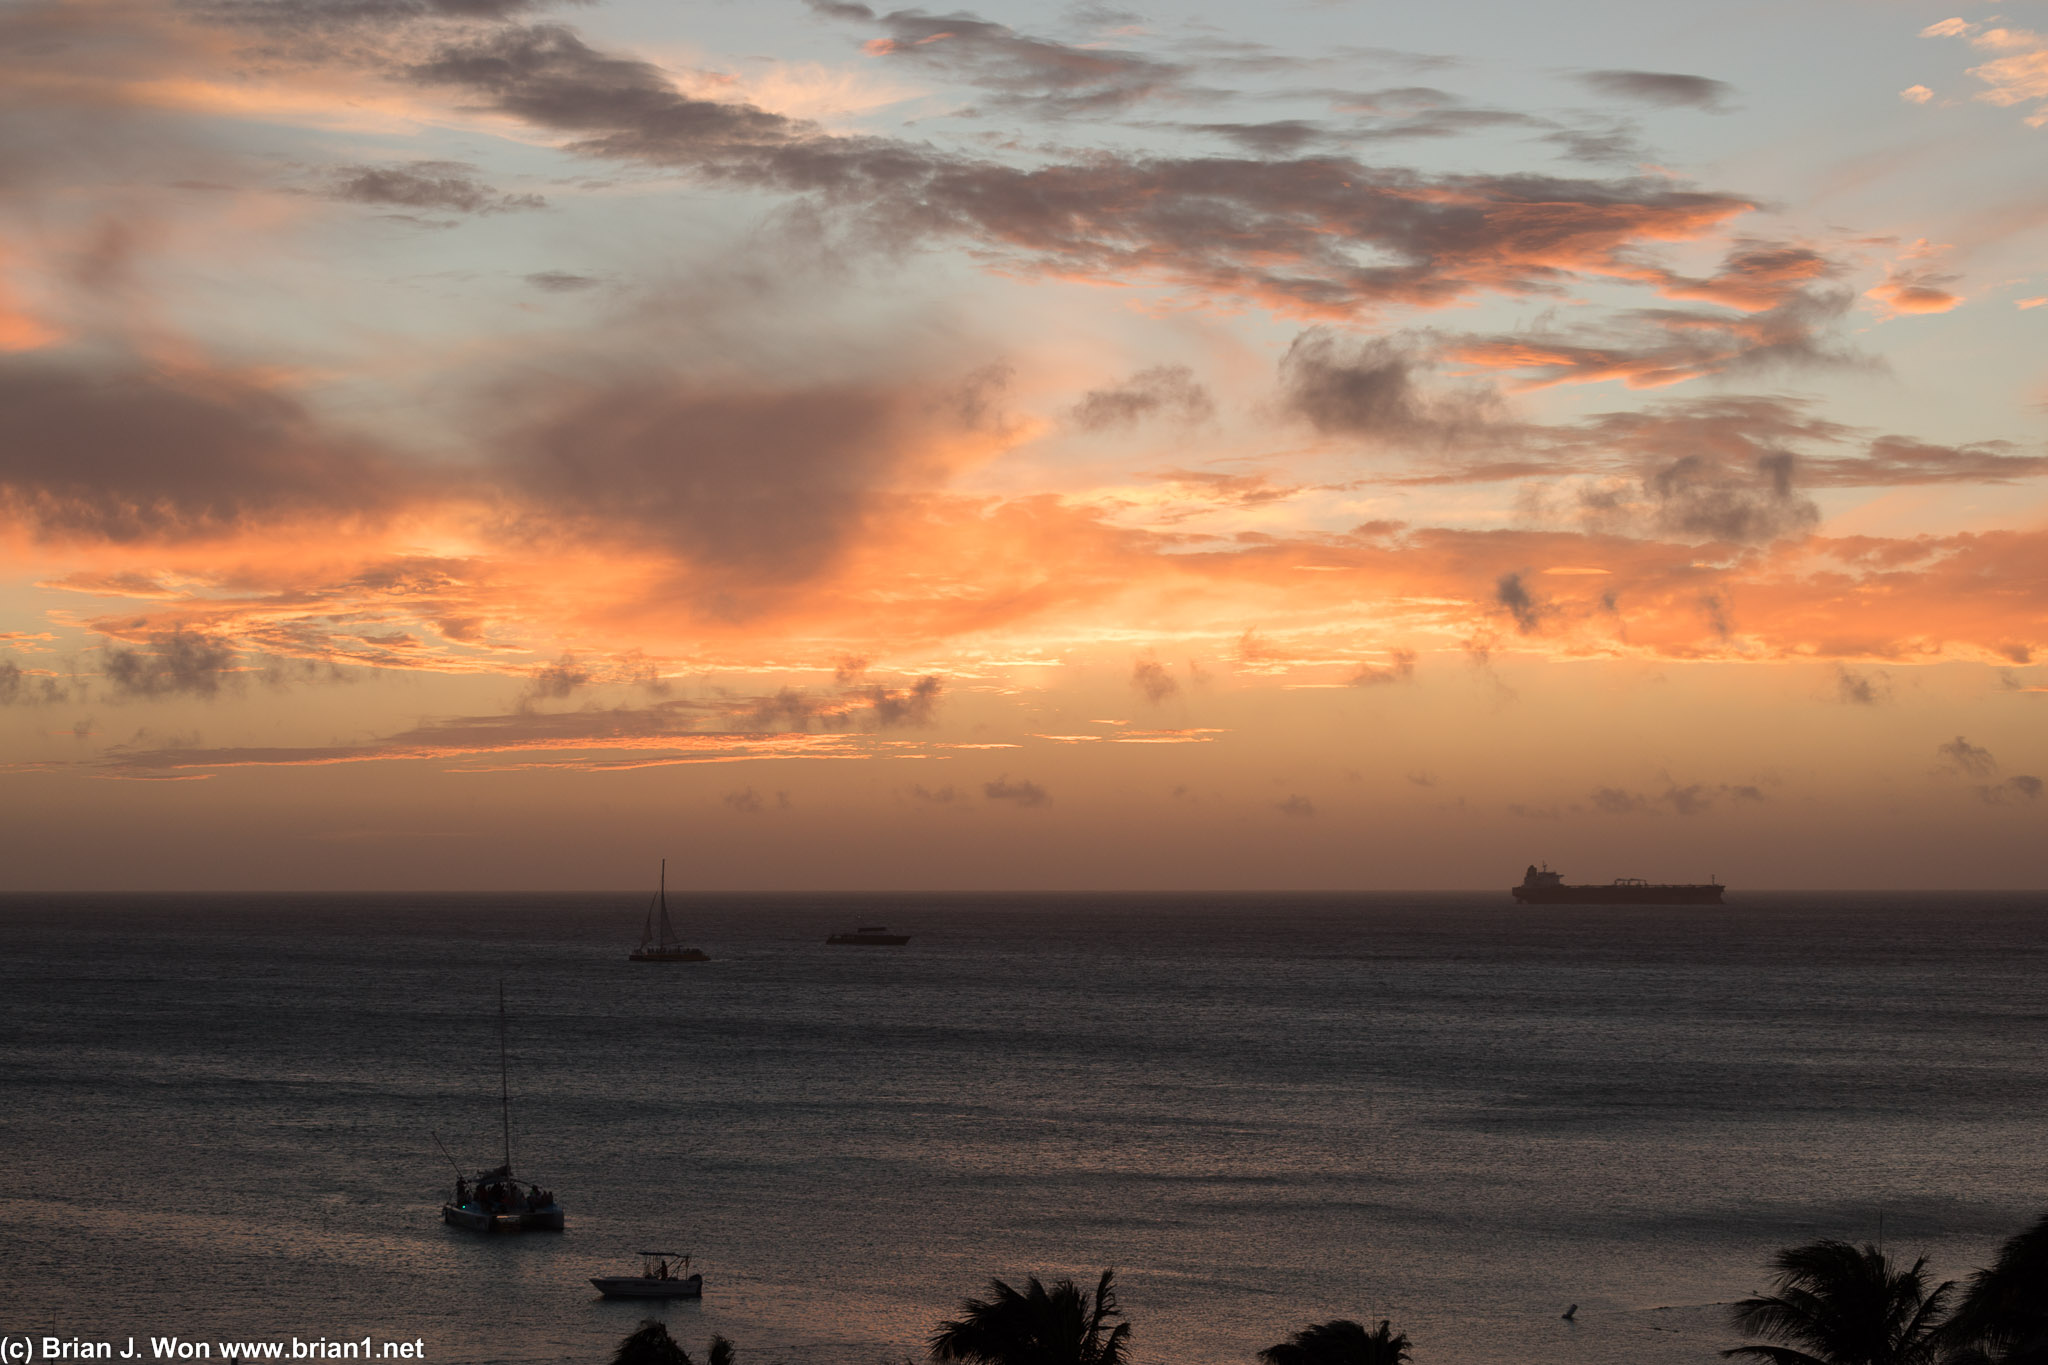 Sailboats, snorkel boats, and a single cargo ship take in the sunset.